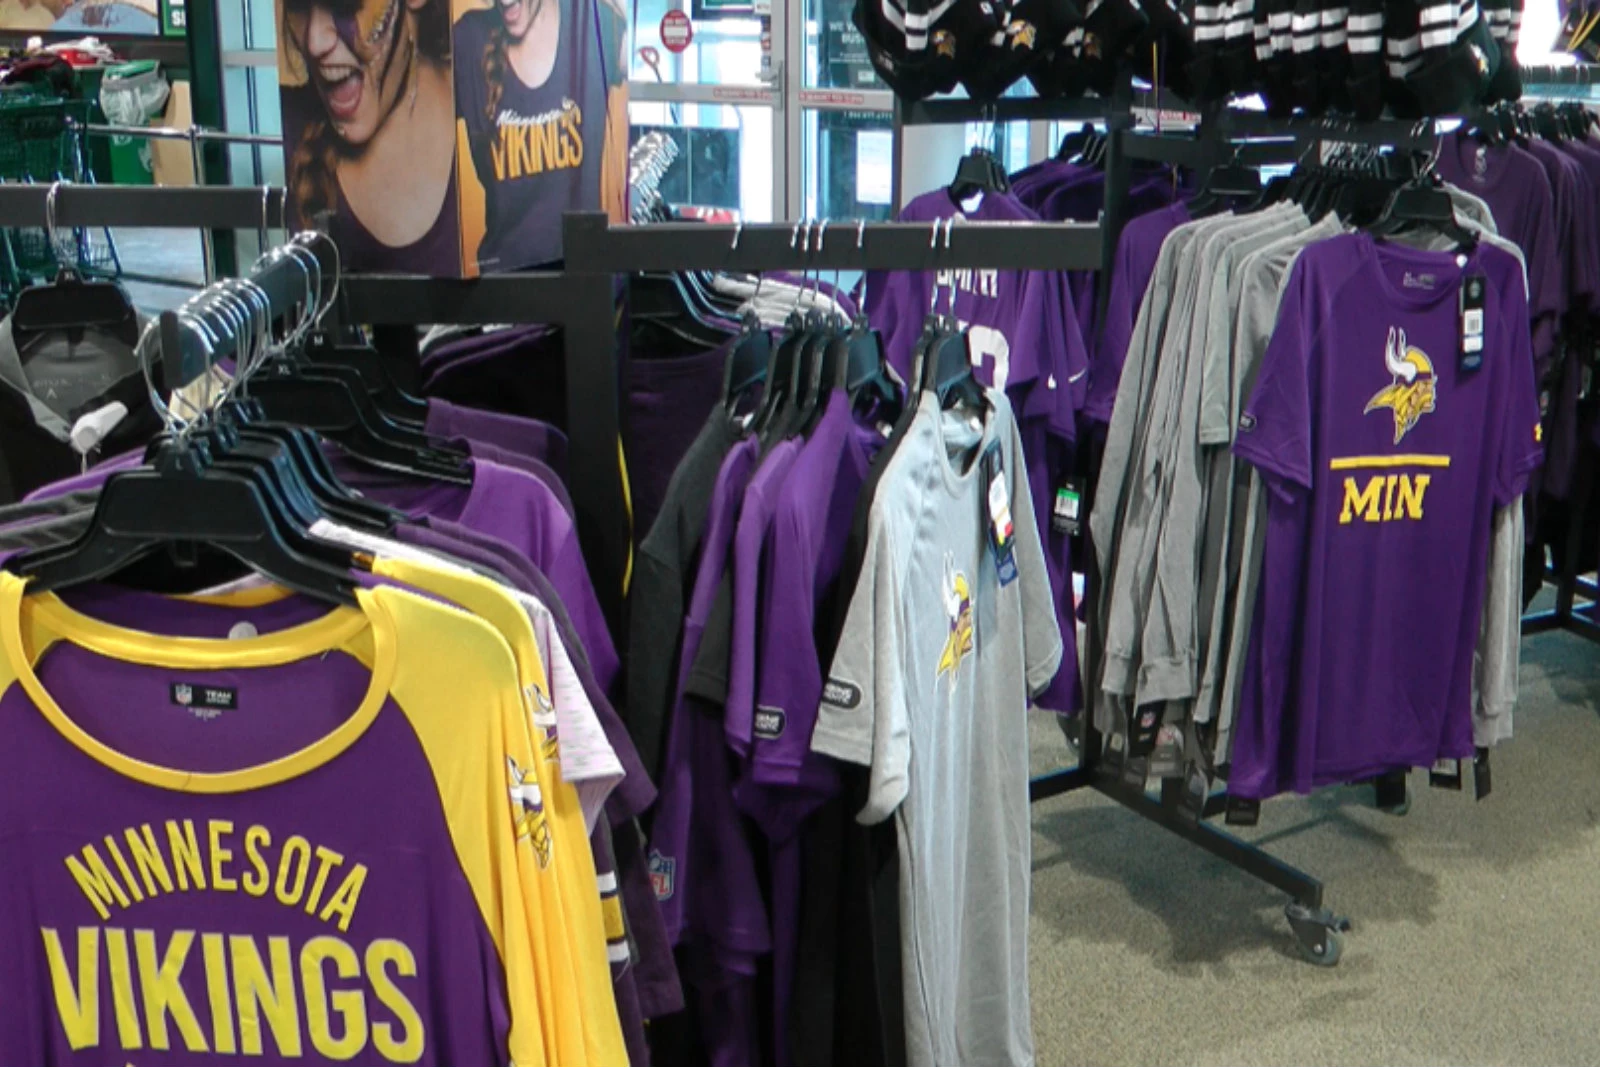 Stores, Bars and Vikings Fans Ready For NFC Championship Game